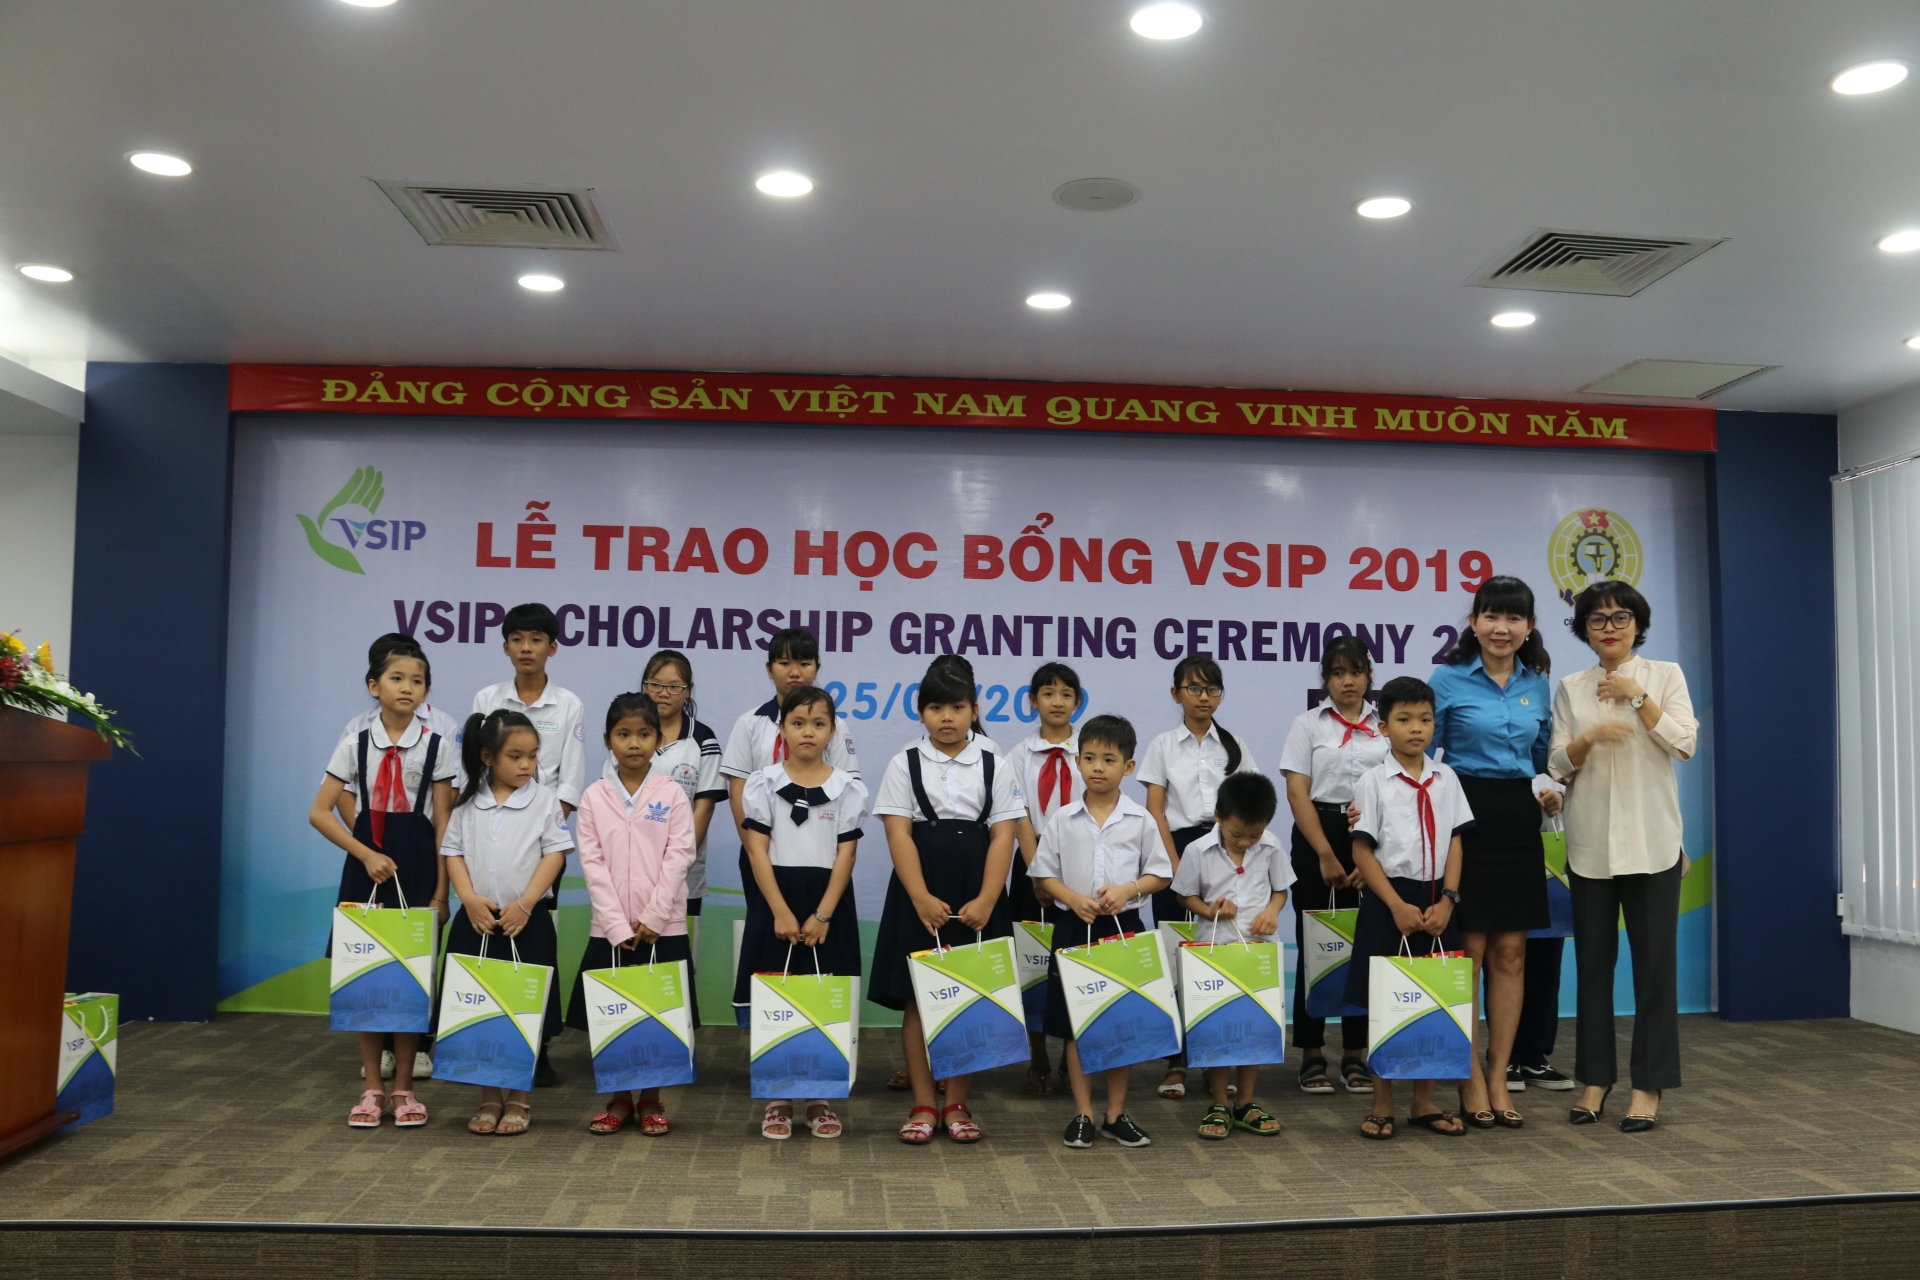 VSIP Charity Fund grants 183 scholarships for students in Binh Duong